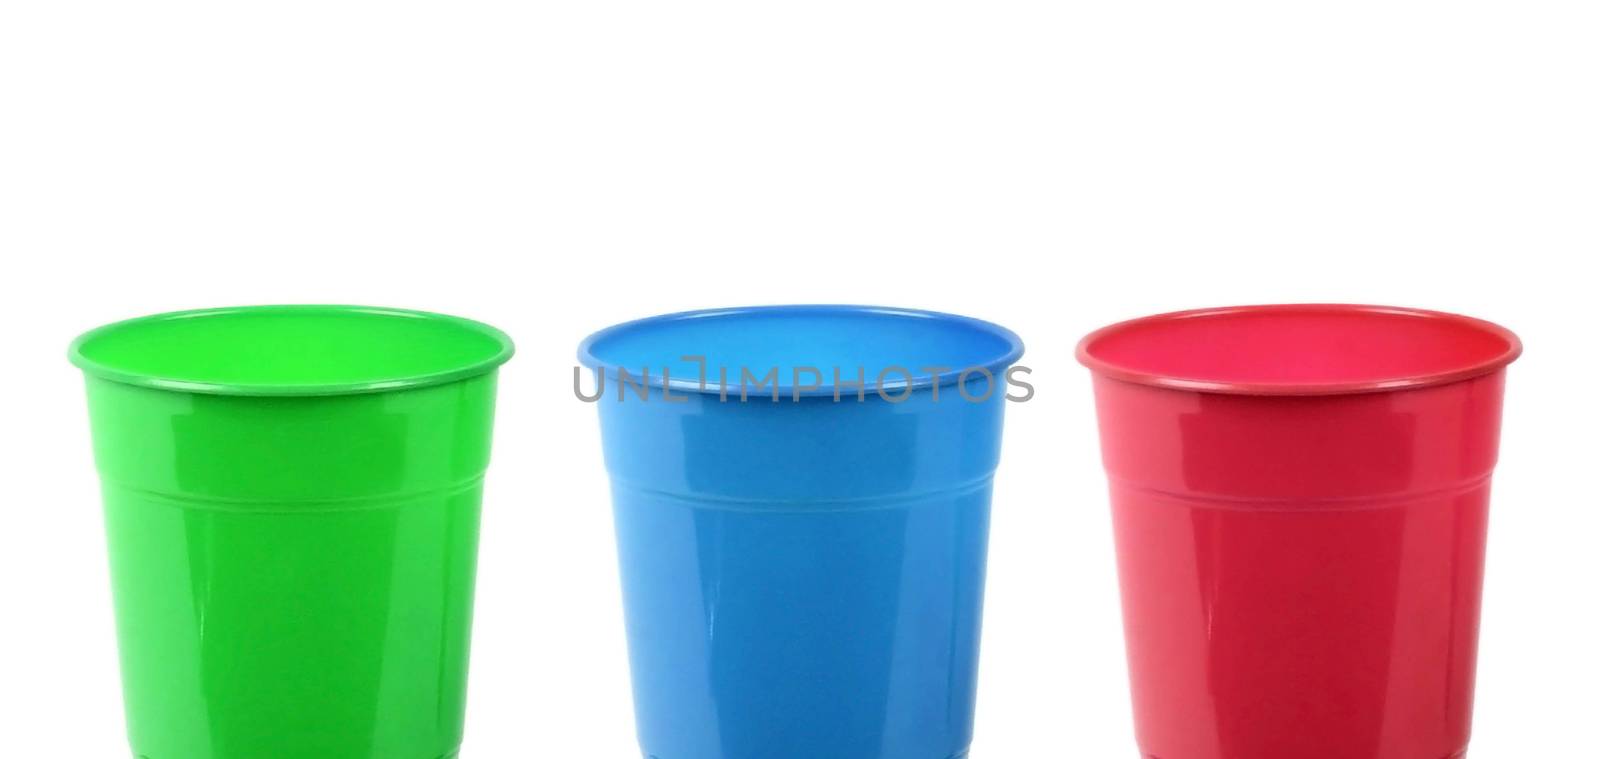 Set of plastic cups by shutswis